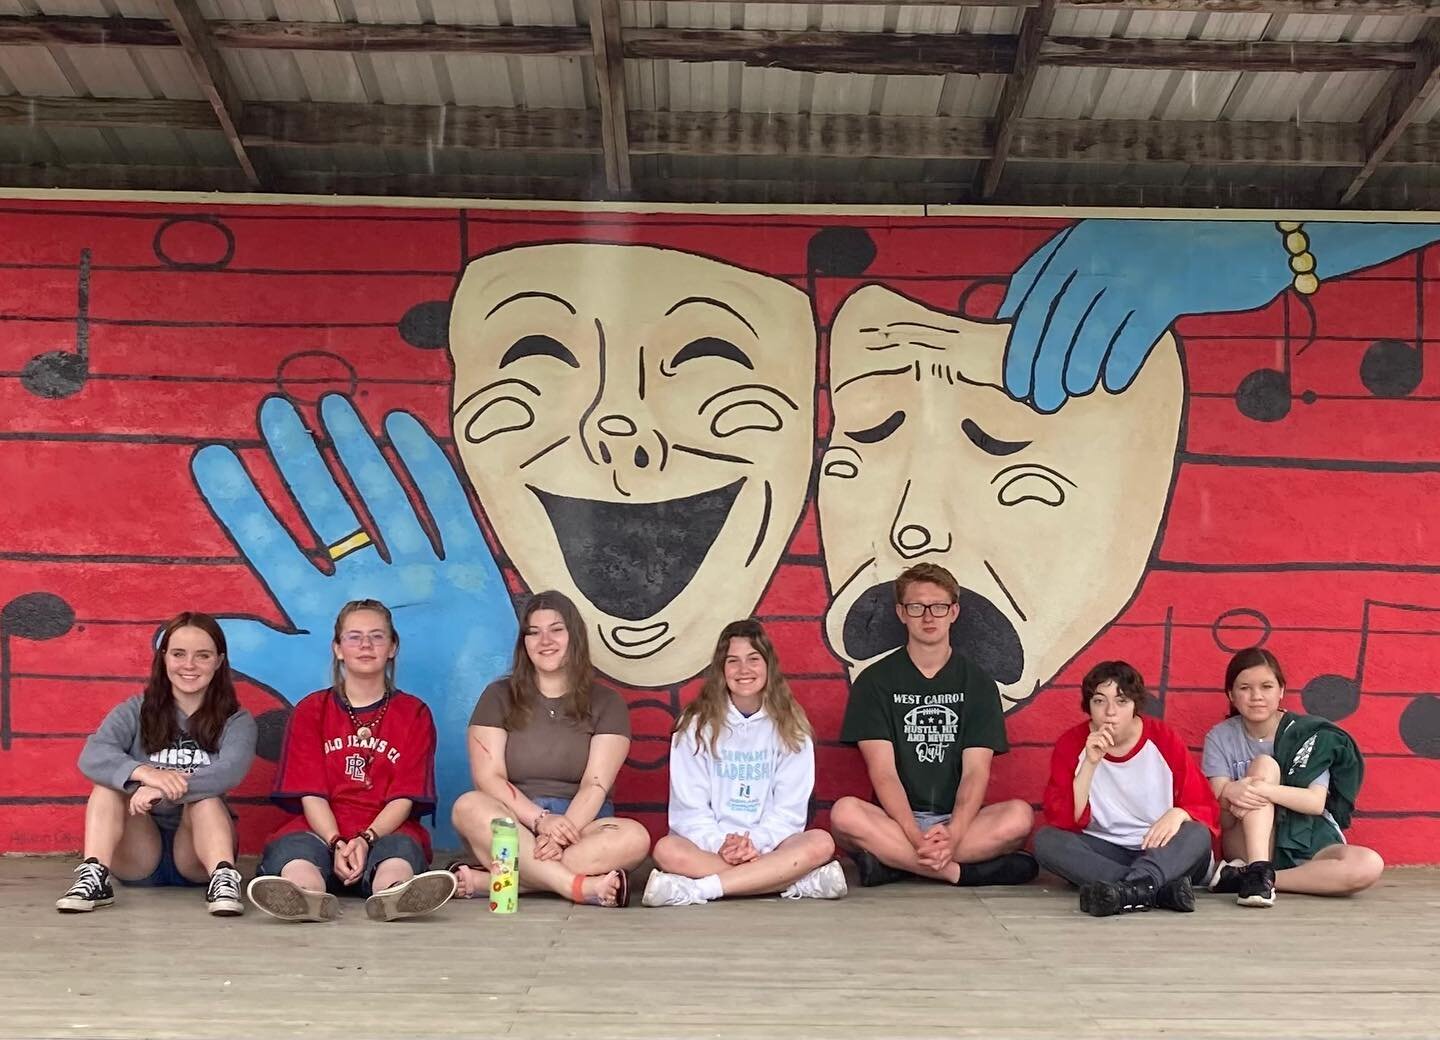 Check out the beautiful murals that West Carroll art students painted here at TLP last week! 🎨 Big thanks to art teacher Jui-Hsian Apostolos and students Aden Stallings, Ella Gilmore, Allison Gilmore, Olivia Shelly, Allison Dugan, Indigo Kloss, Madd